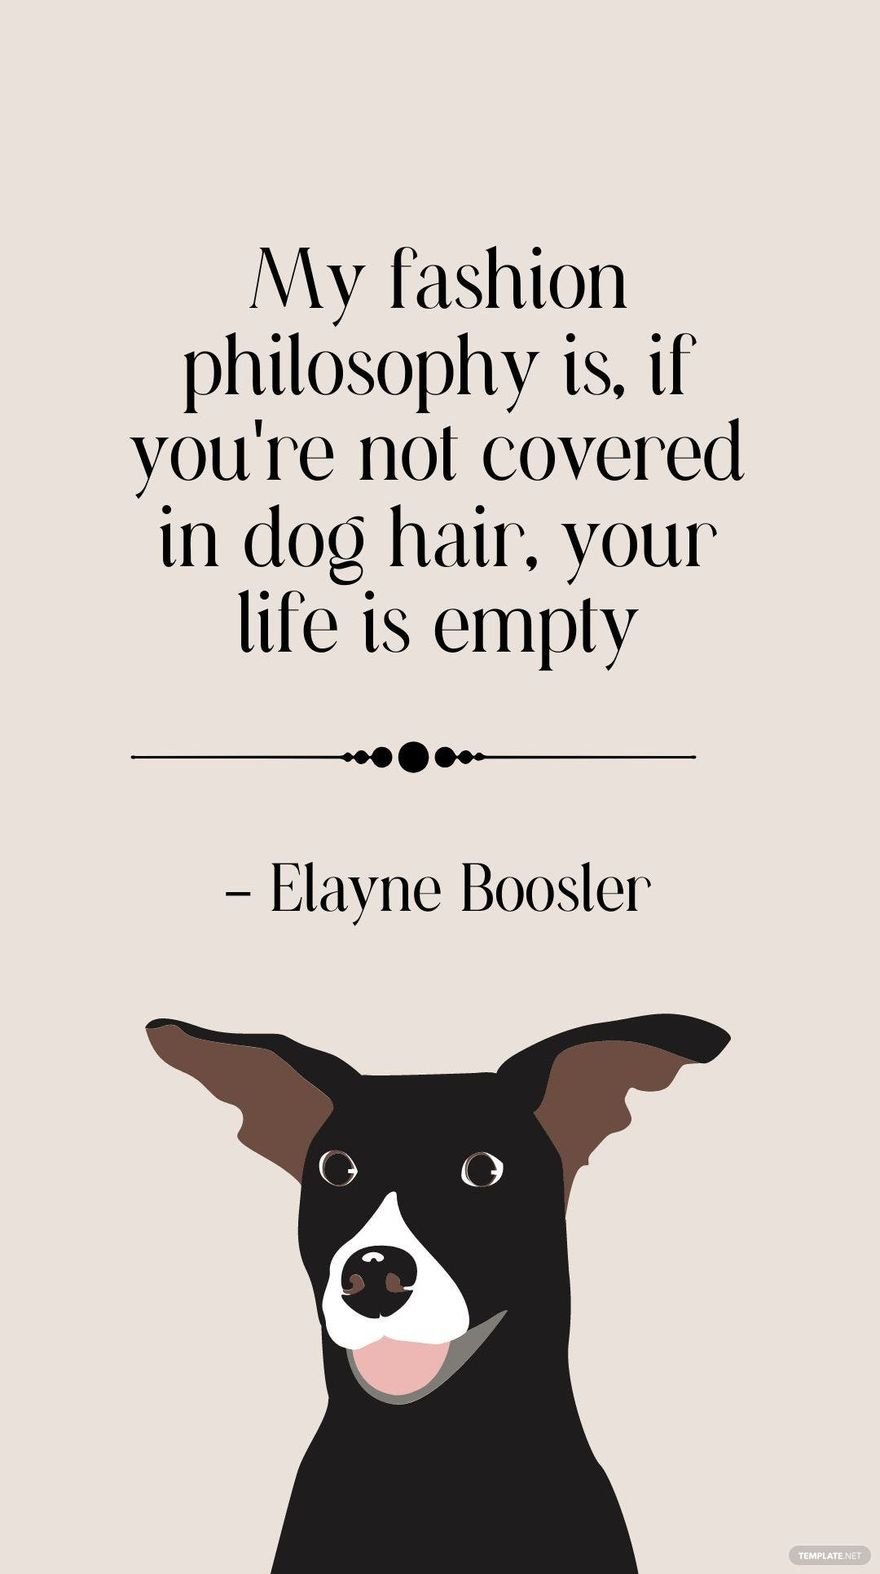 Elayne Boosler - My fashion philosophy is, if you're not covered in dog hair, your life is empty in JPG